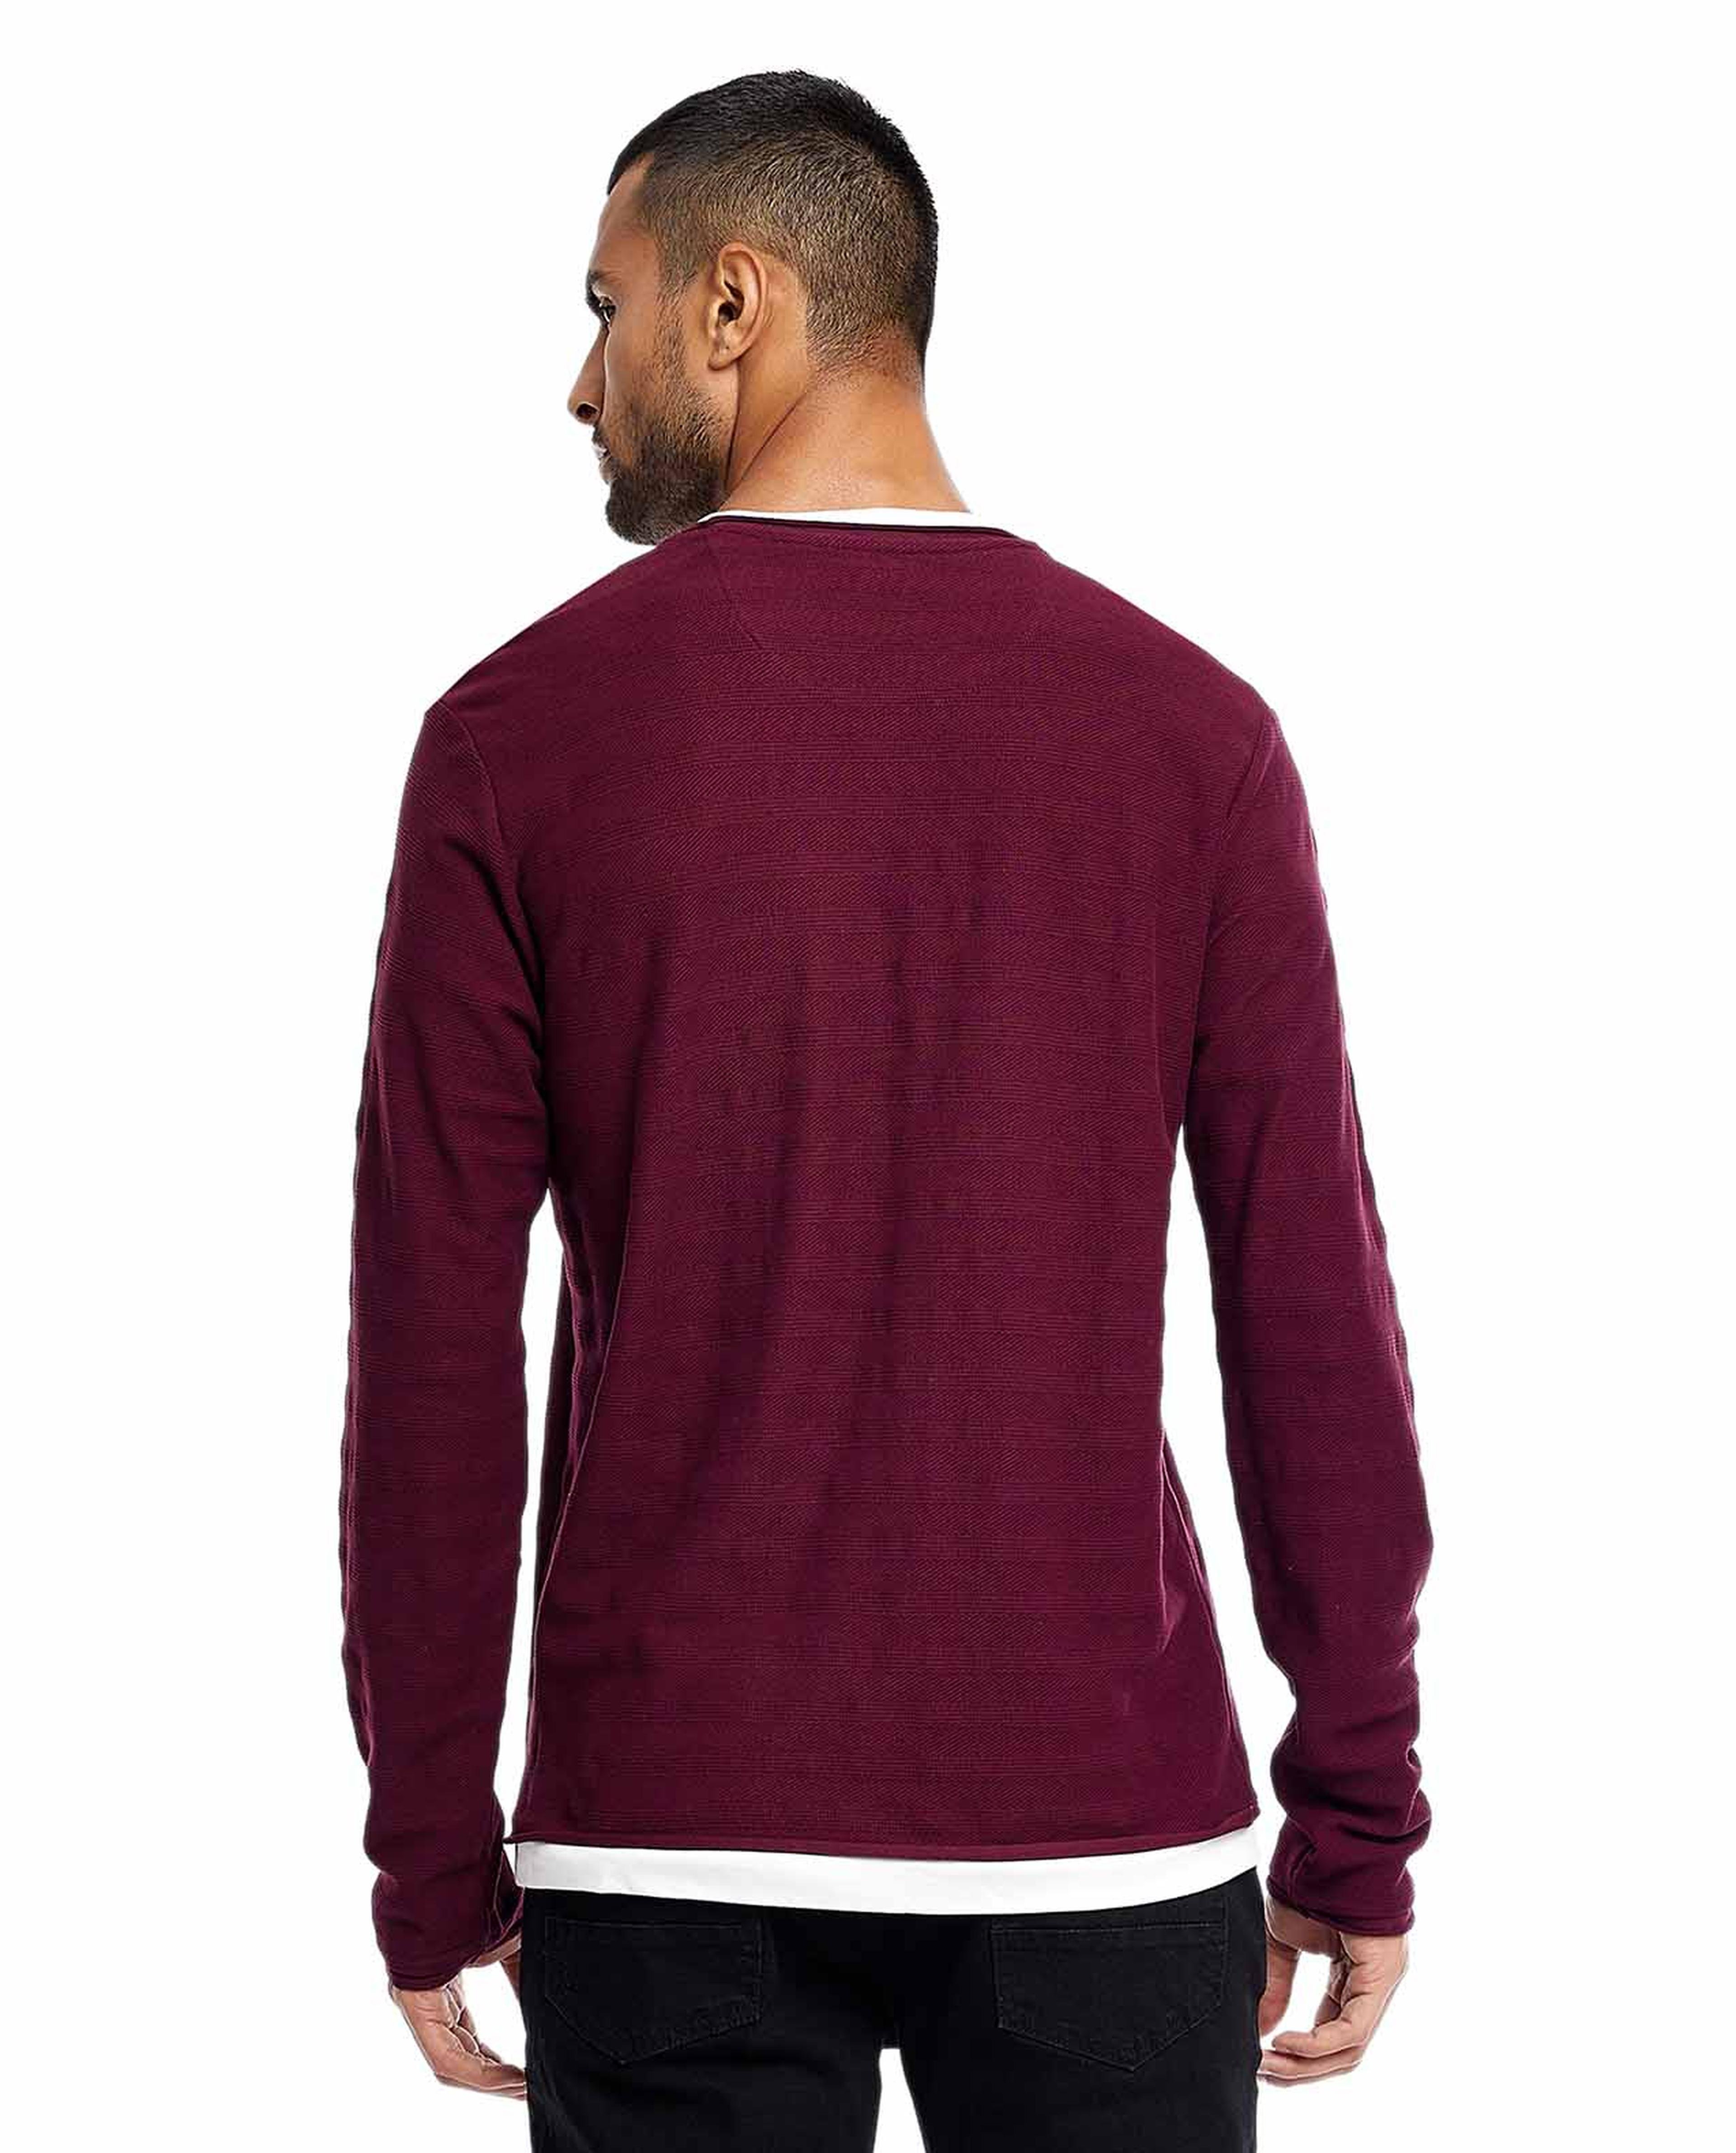 Self Patterned T-Shirt with Crew Neck and Long Sleeves